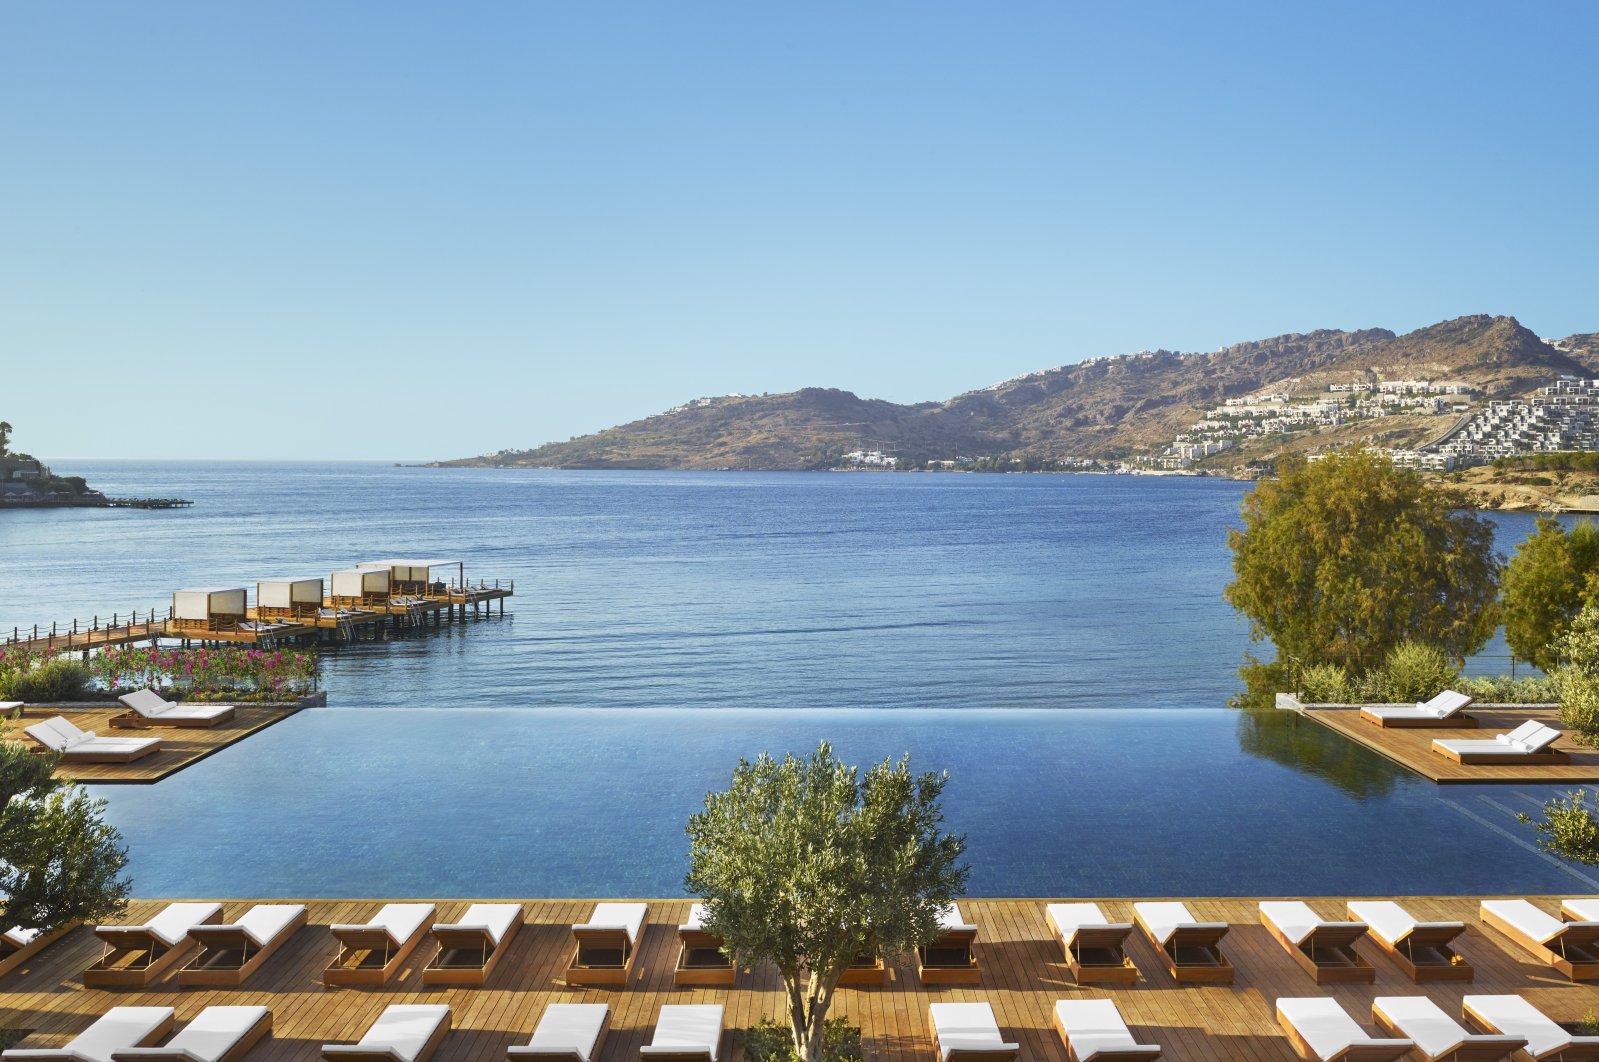 A panoramic view from Bodrum Edition Hotel, Bodrum, Türkiye, June 10, 2008. (Photo Courtesy of Bodrum Edition Hotel)